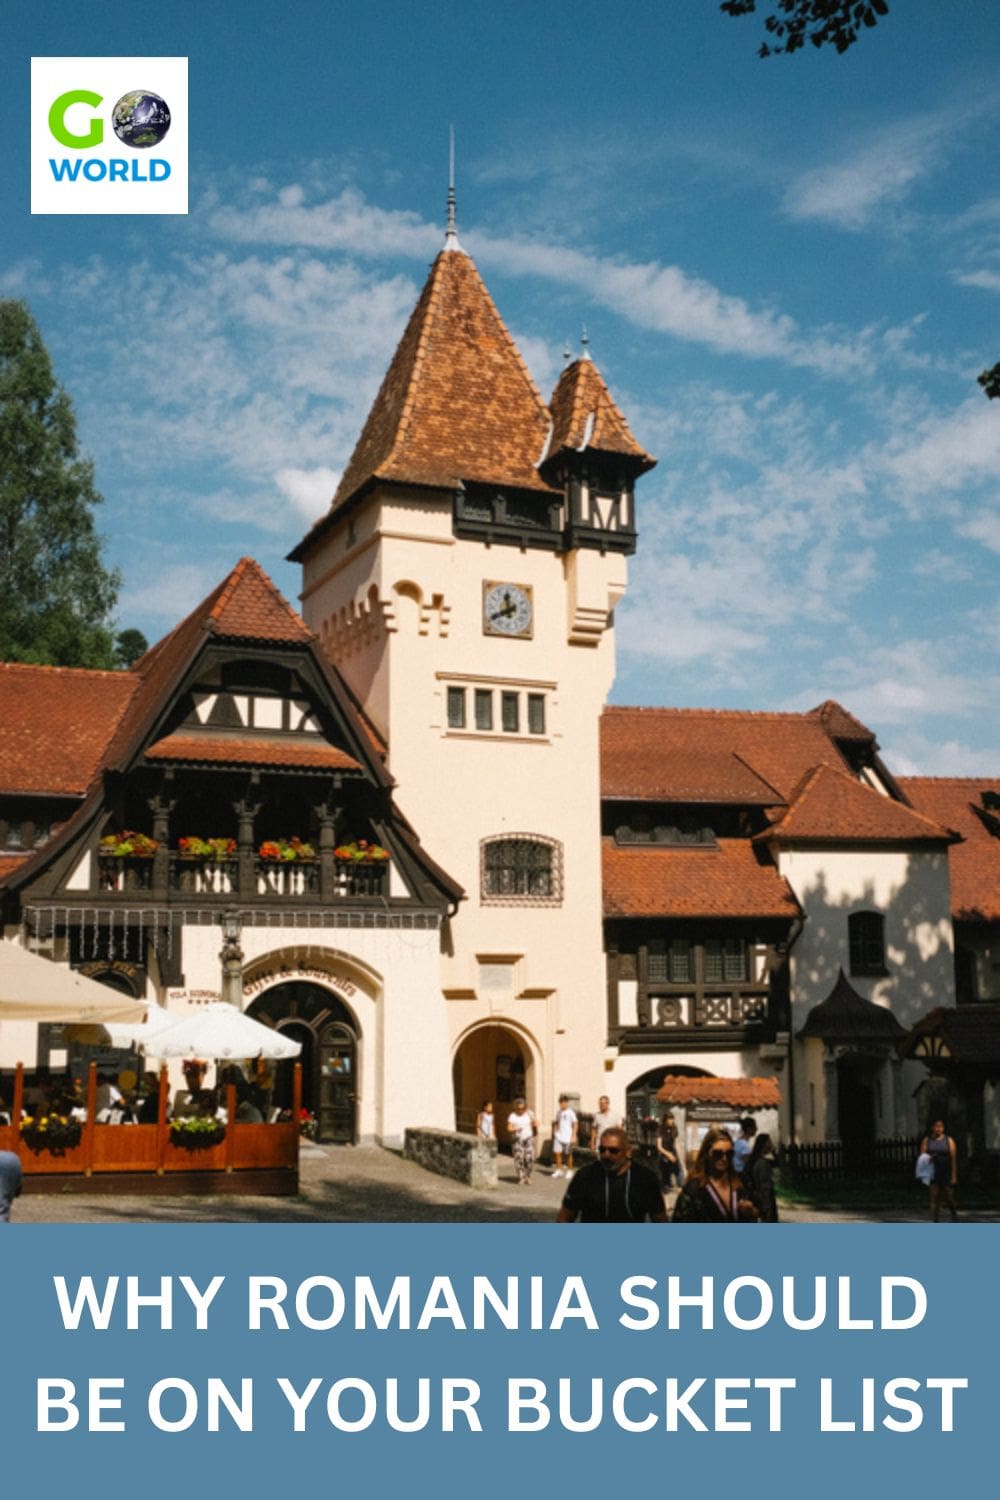 Wondering what to do in Romania? Castles, hiking and bears are some of the unique attractions of this friendly and beautiful European country. #romania